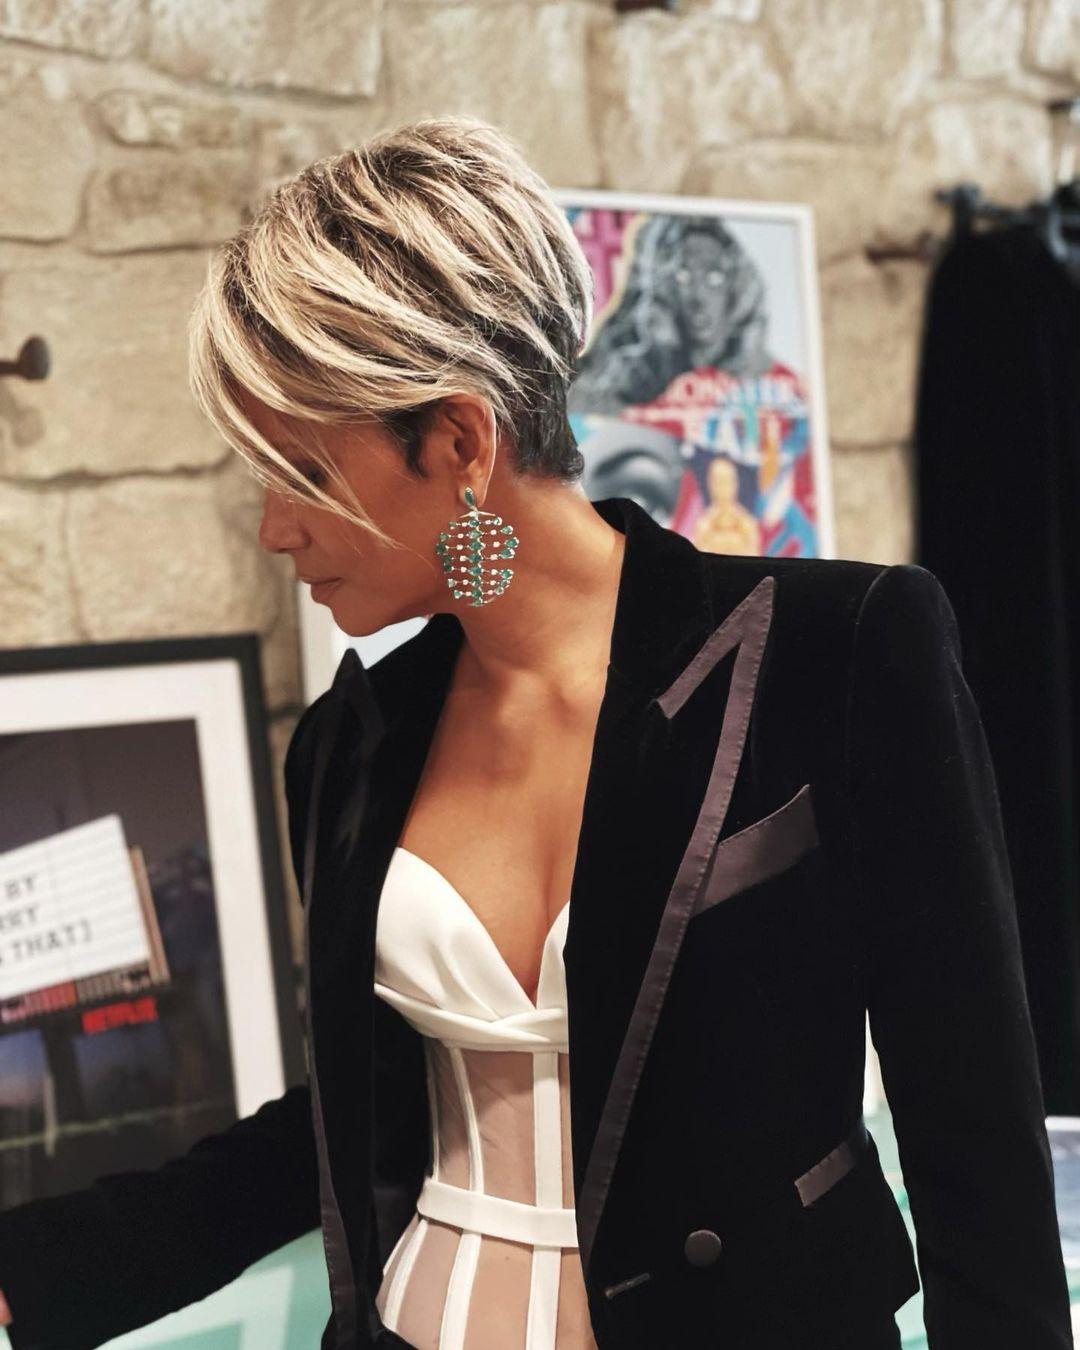 Halle Berry debuts new short hair